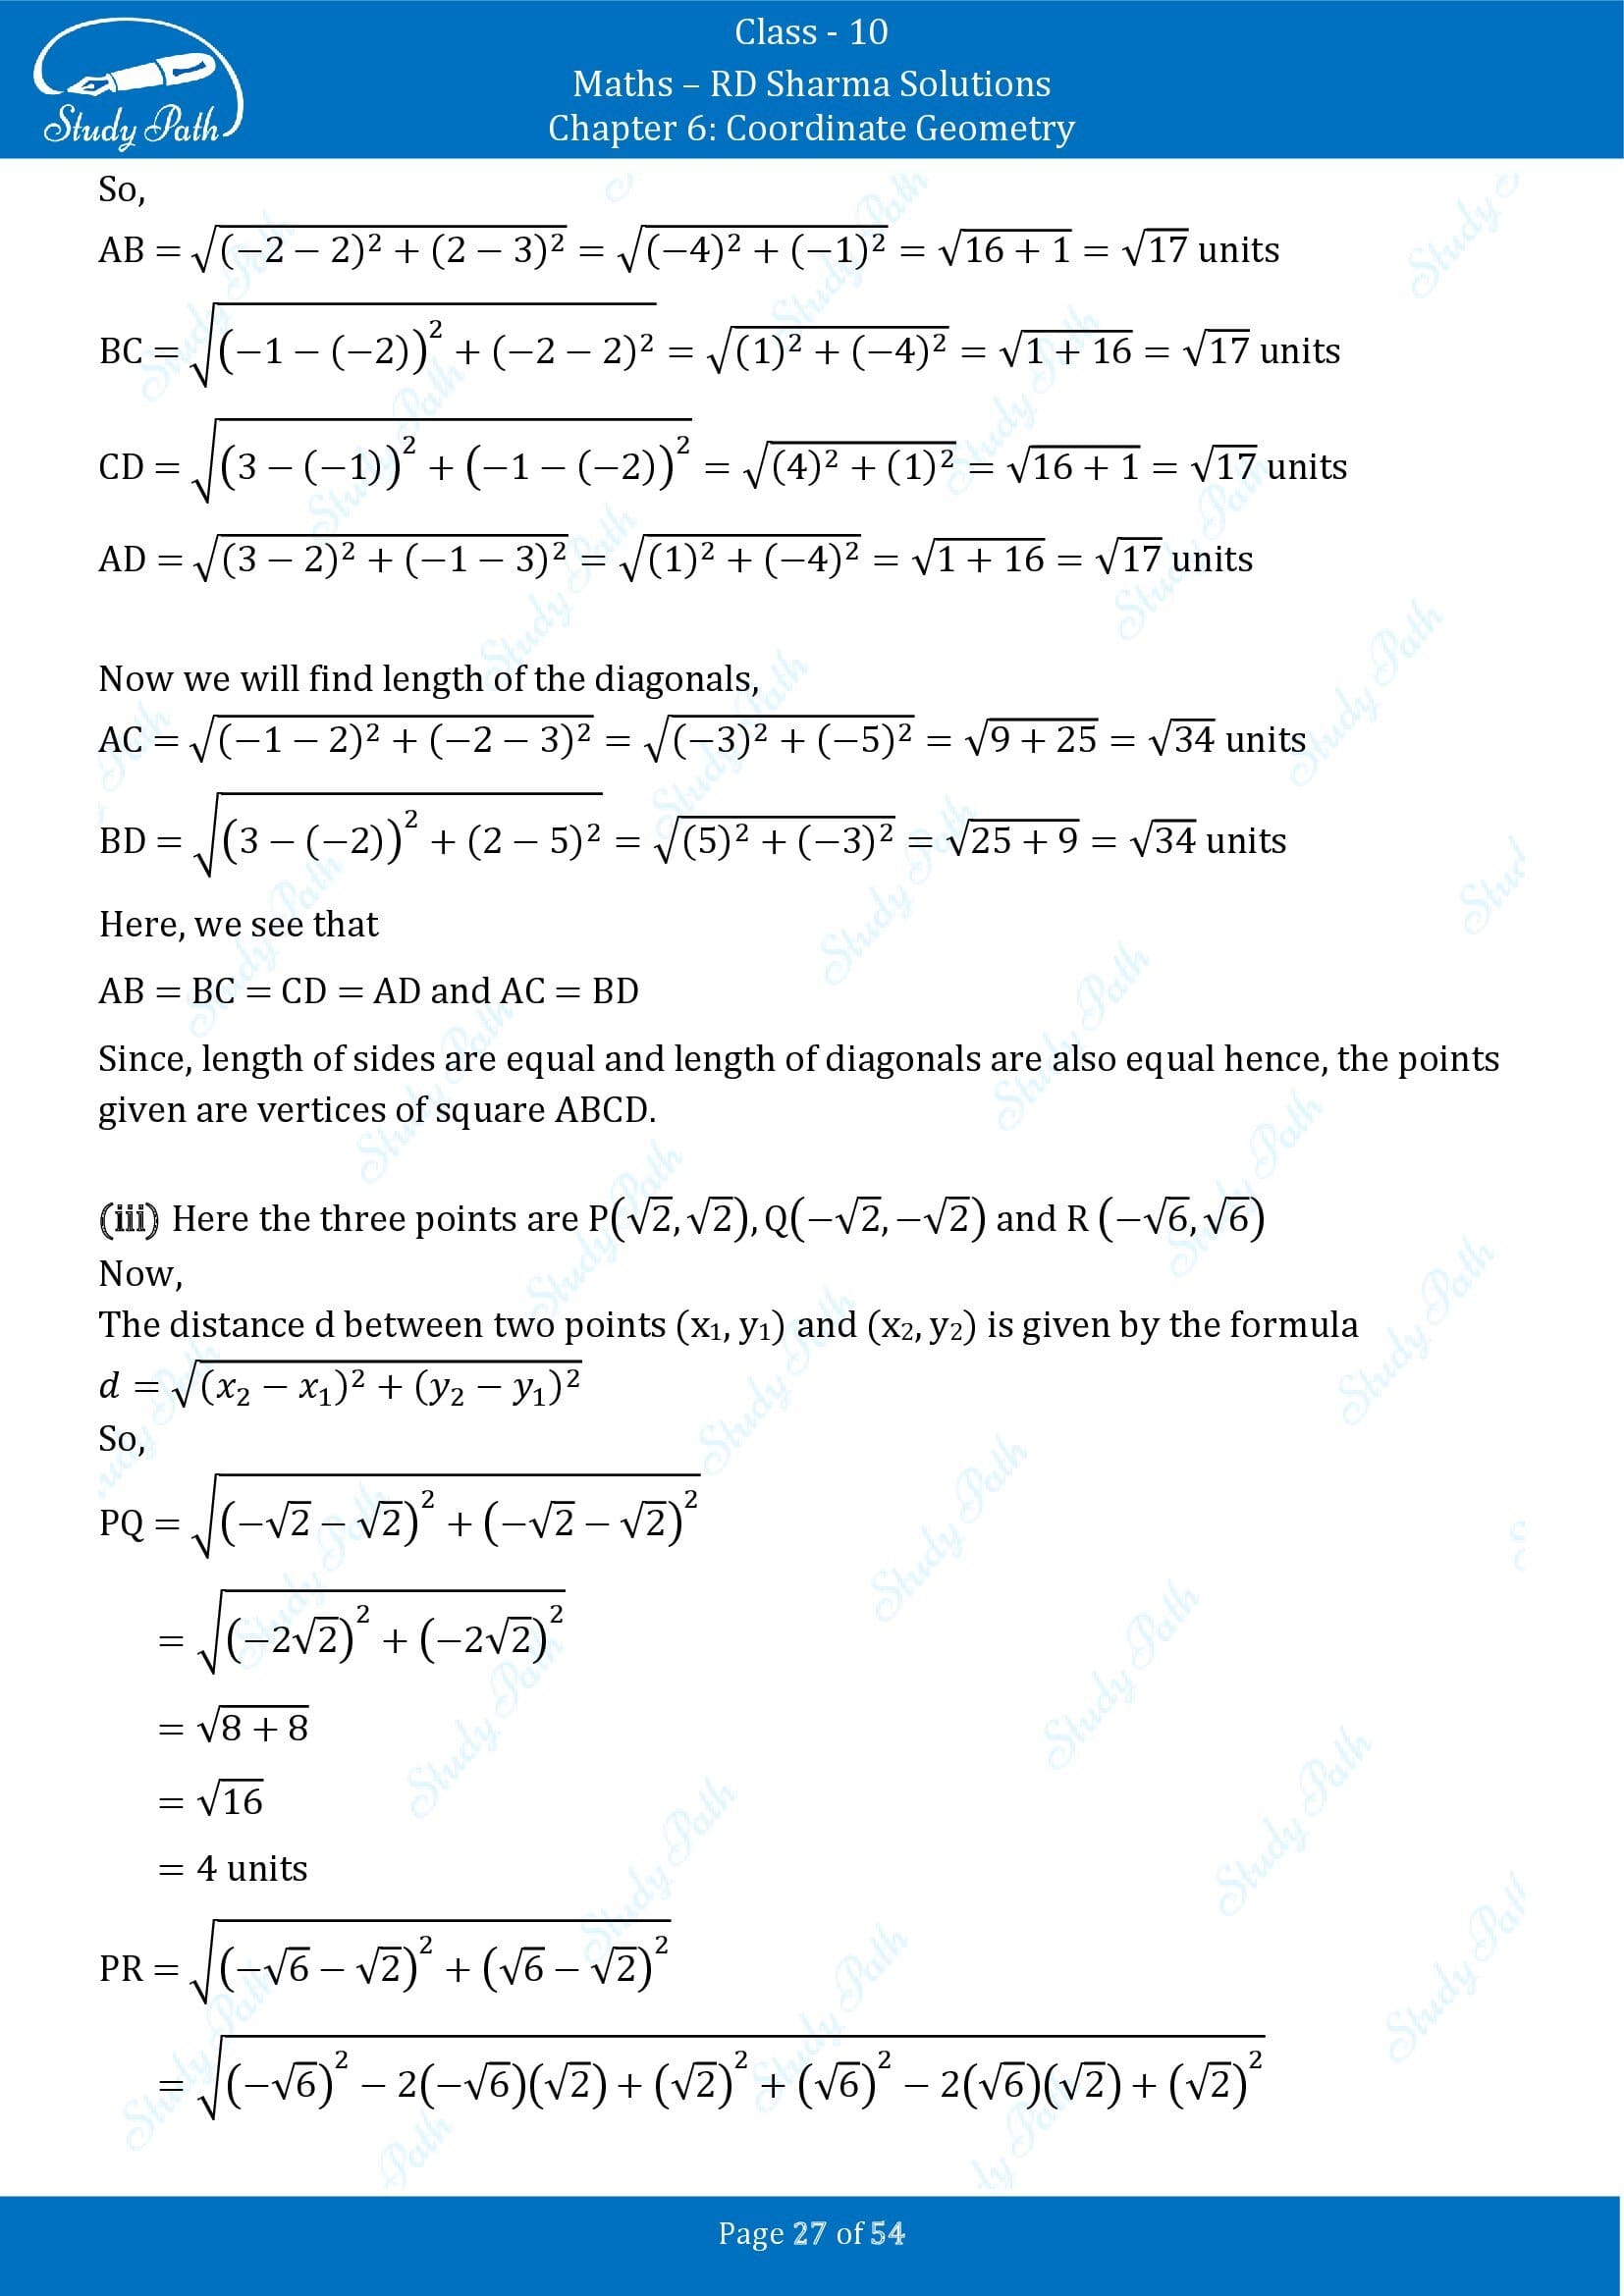 RD Sharma Solutions Class 10 Chapter 6 Coordinate Geometry Exercise 6.2 0027